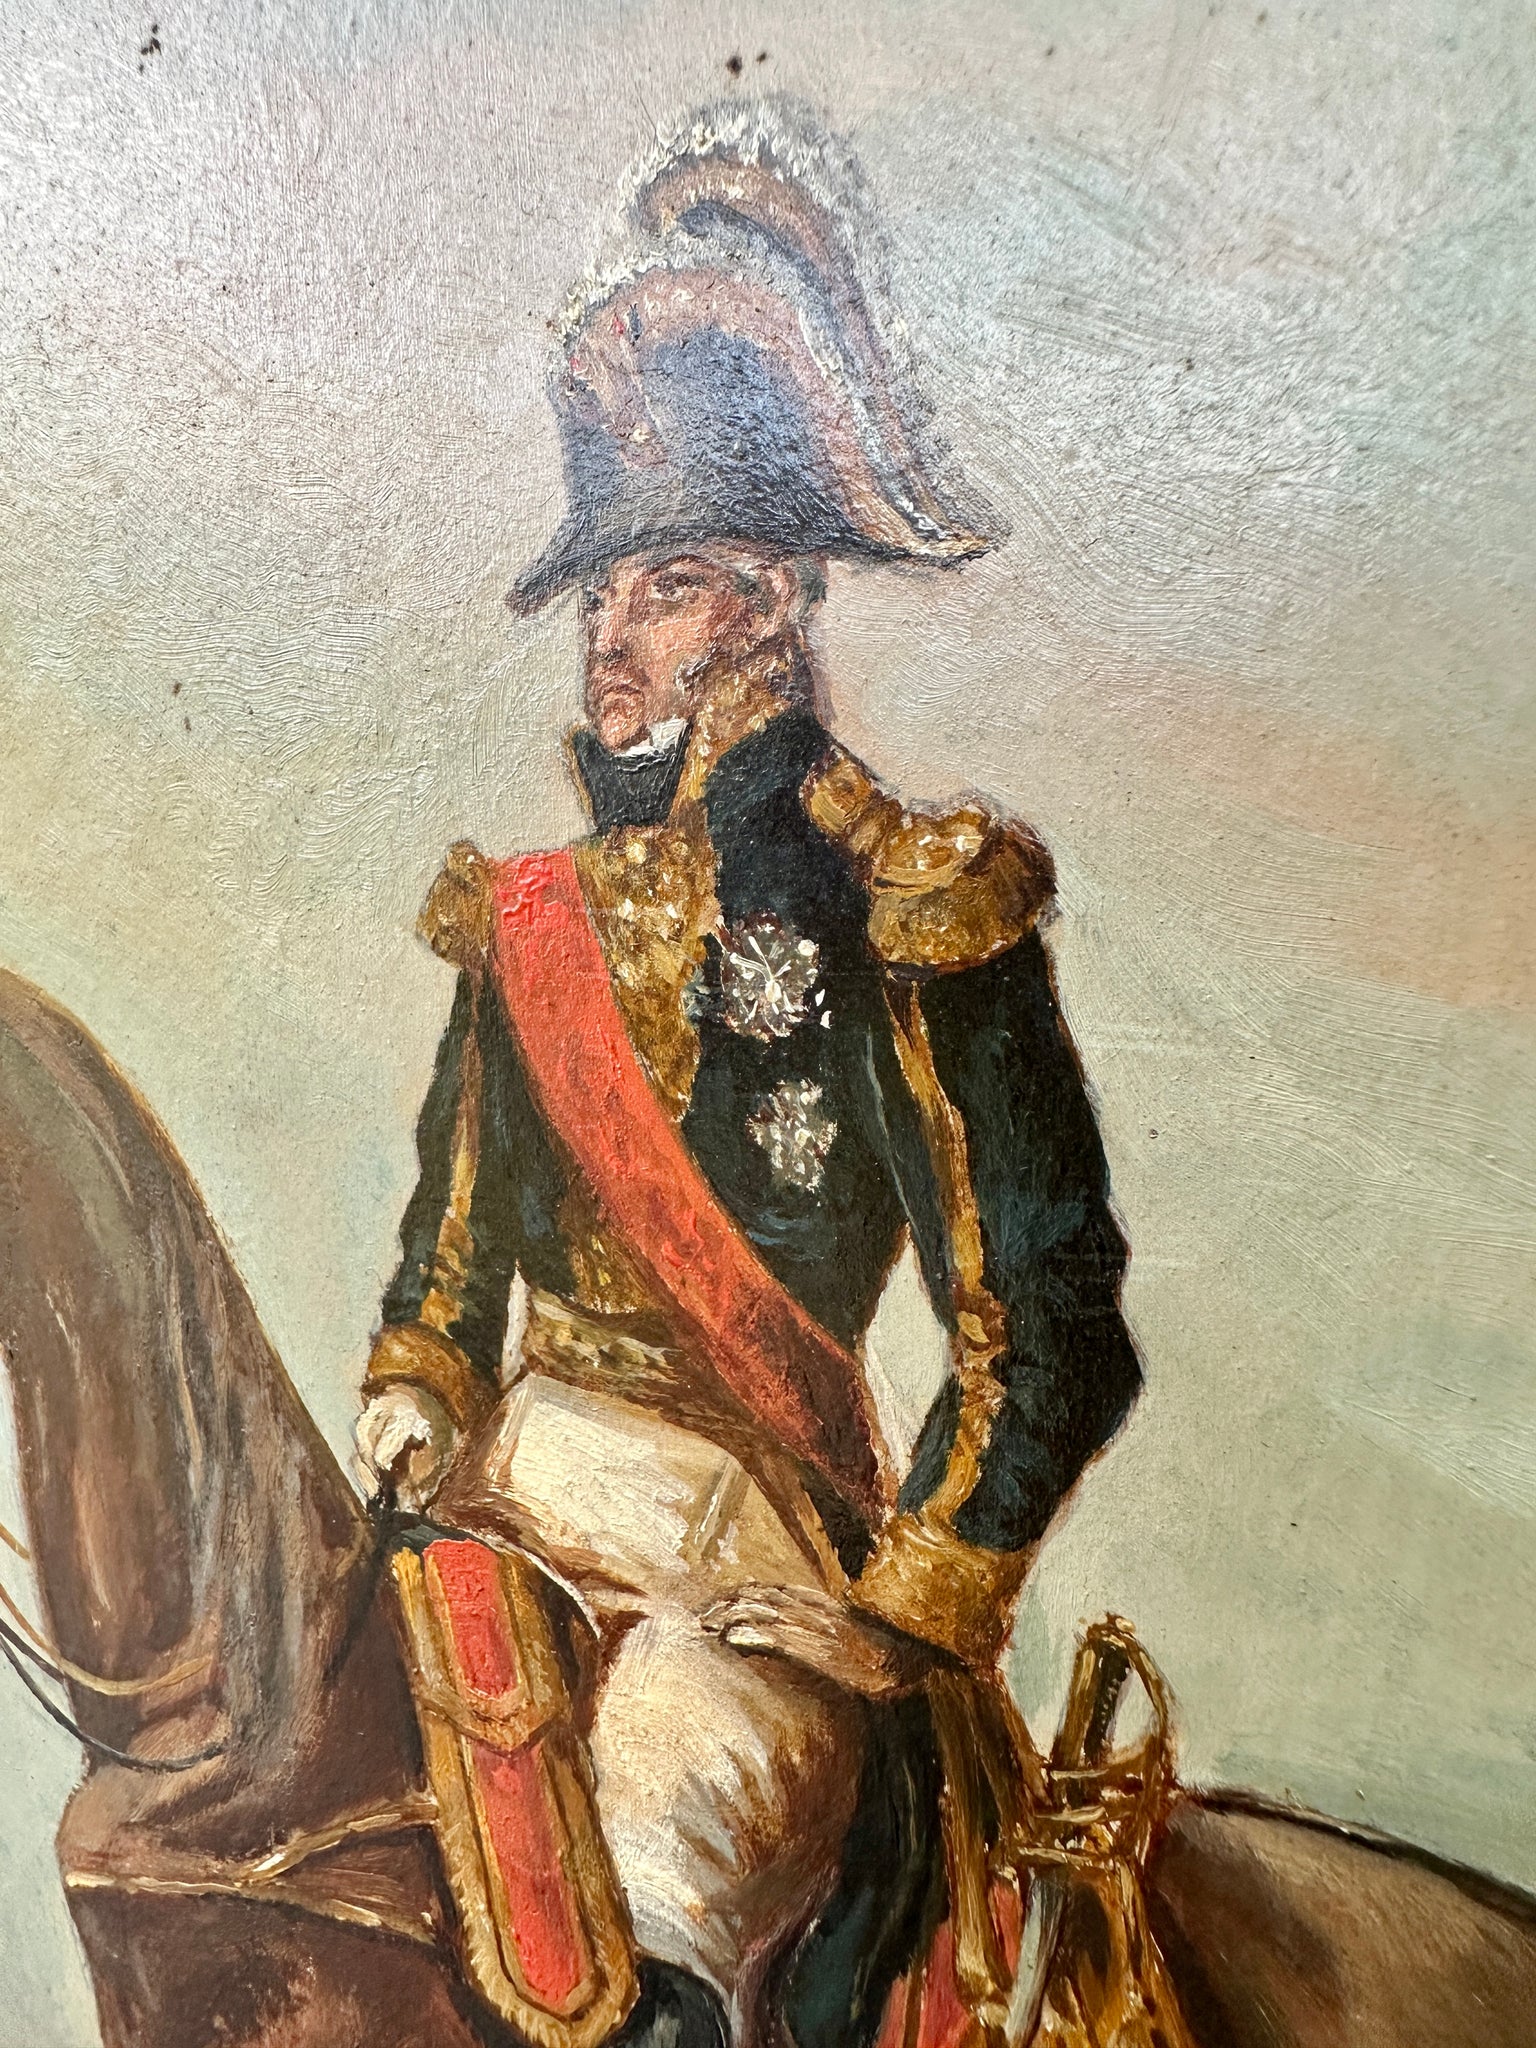 Antique French Oil Painting on board Admiral Empire Horse 19th